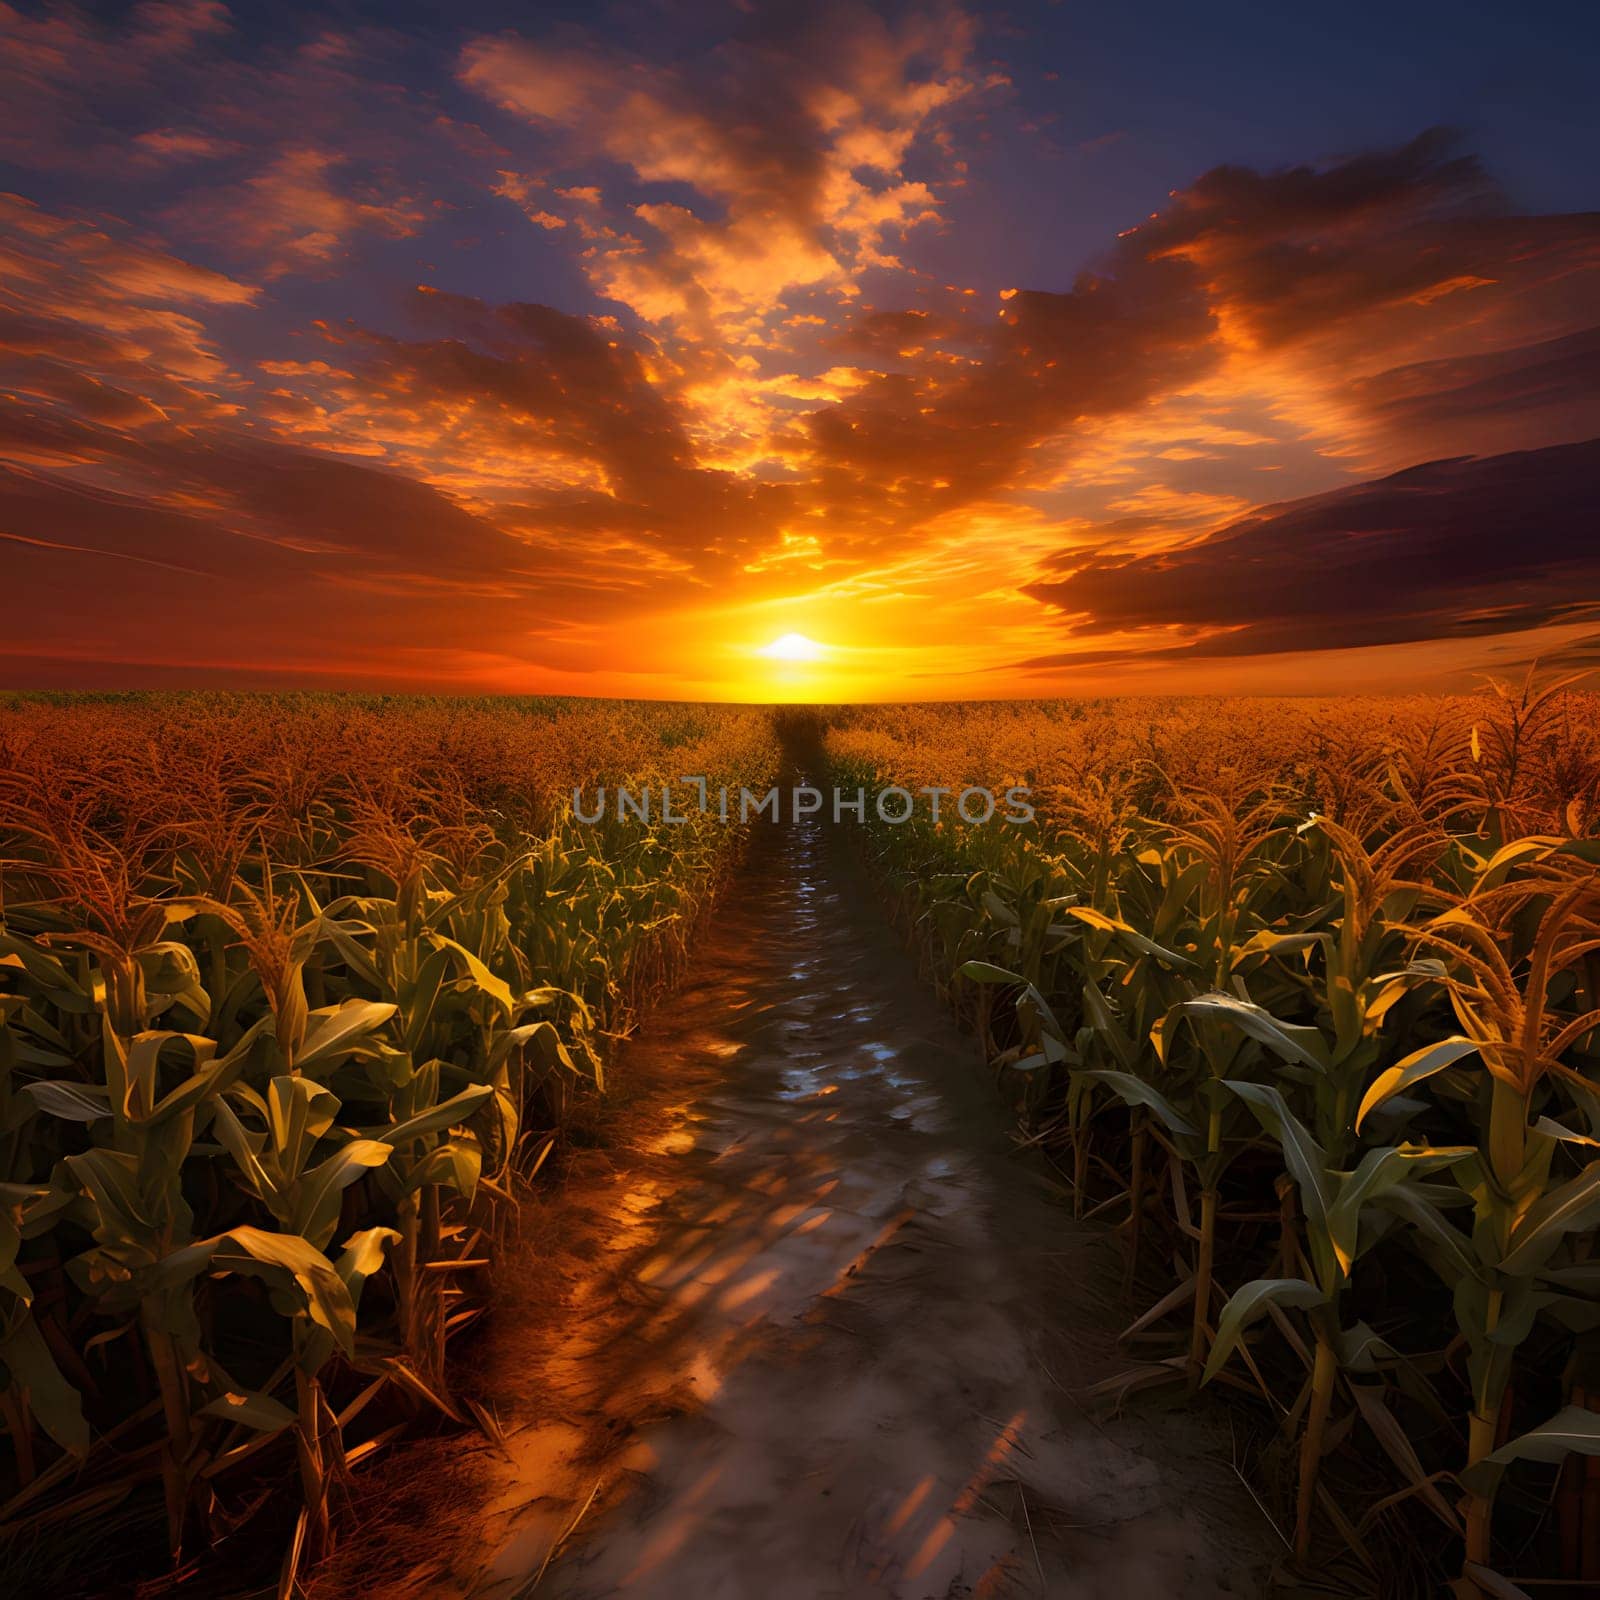 A path in a corn field at sunset or sunrise. Corn as a dish of thanksgiving for the harvest. An atmosphere of joy and celebration.